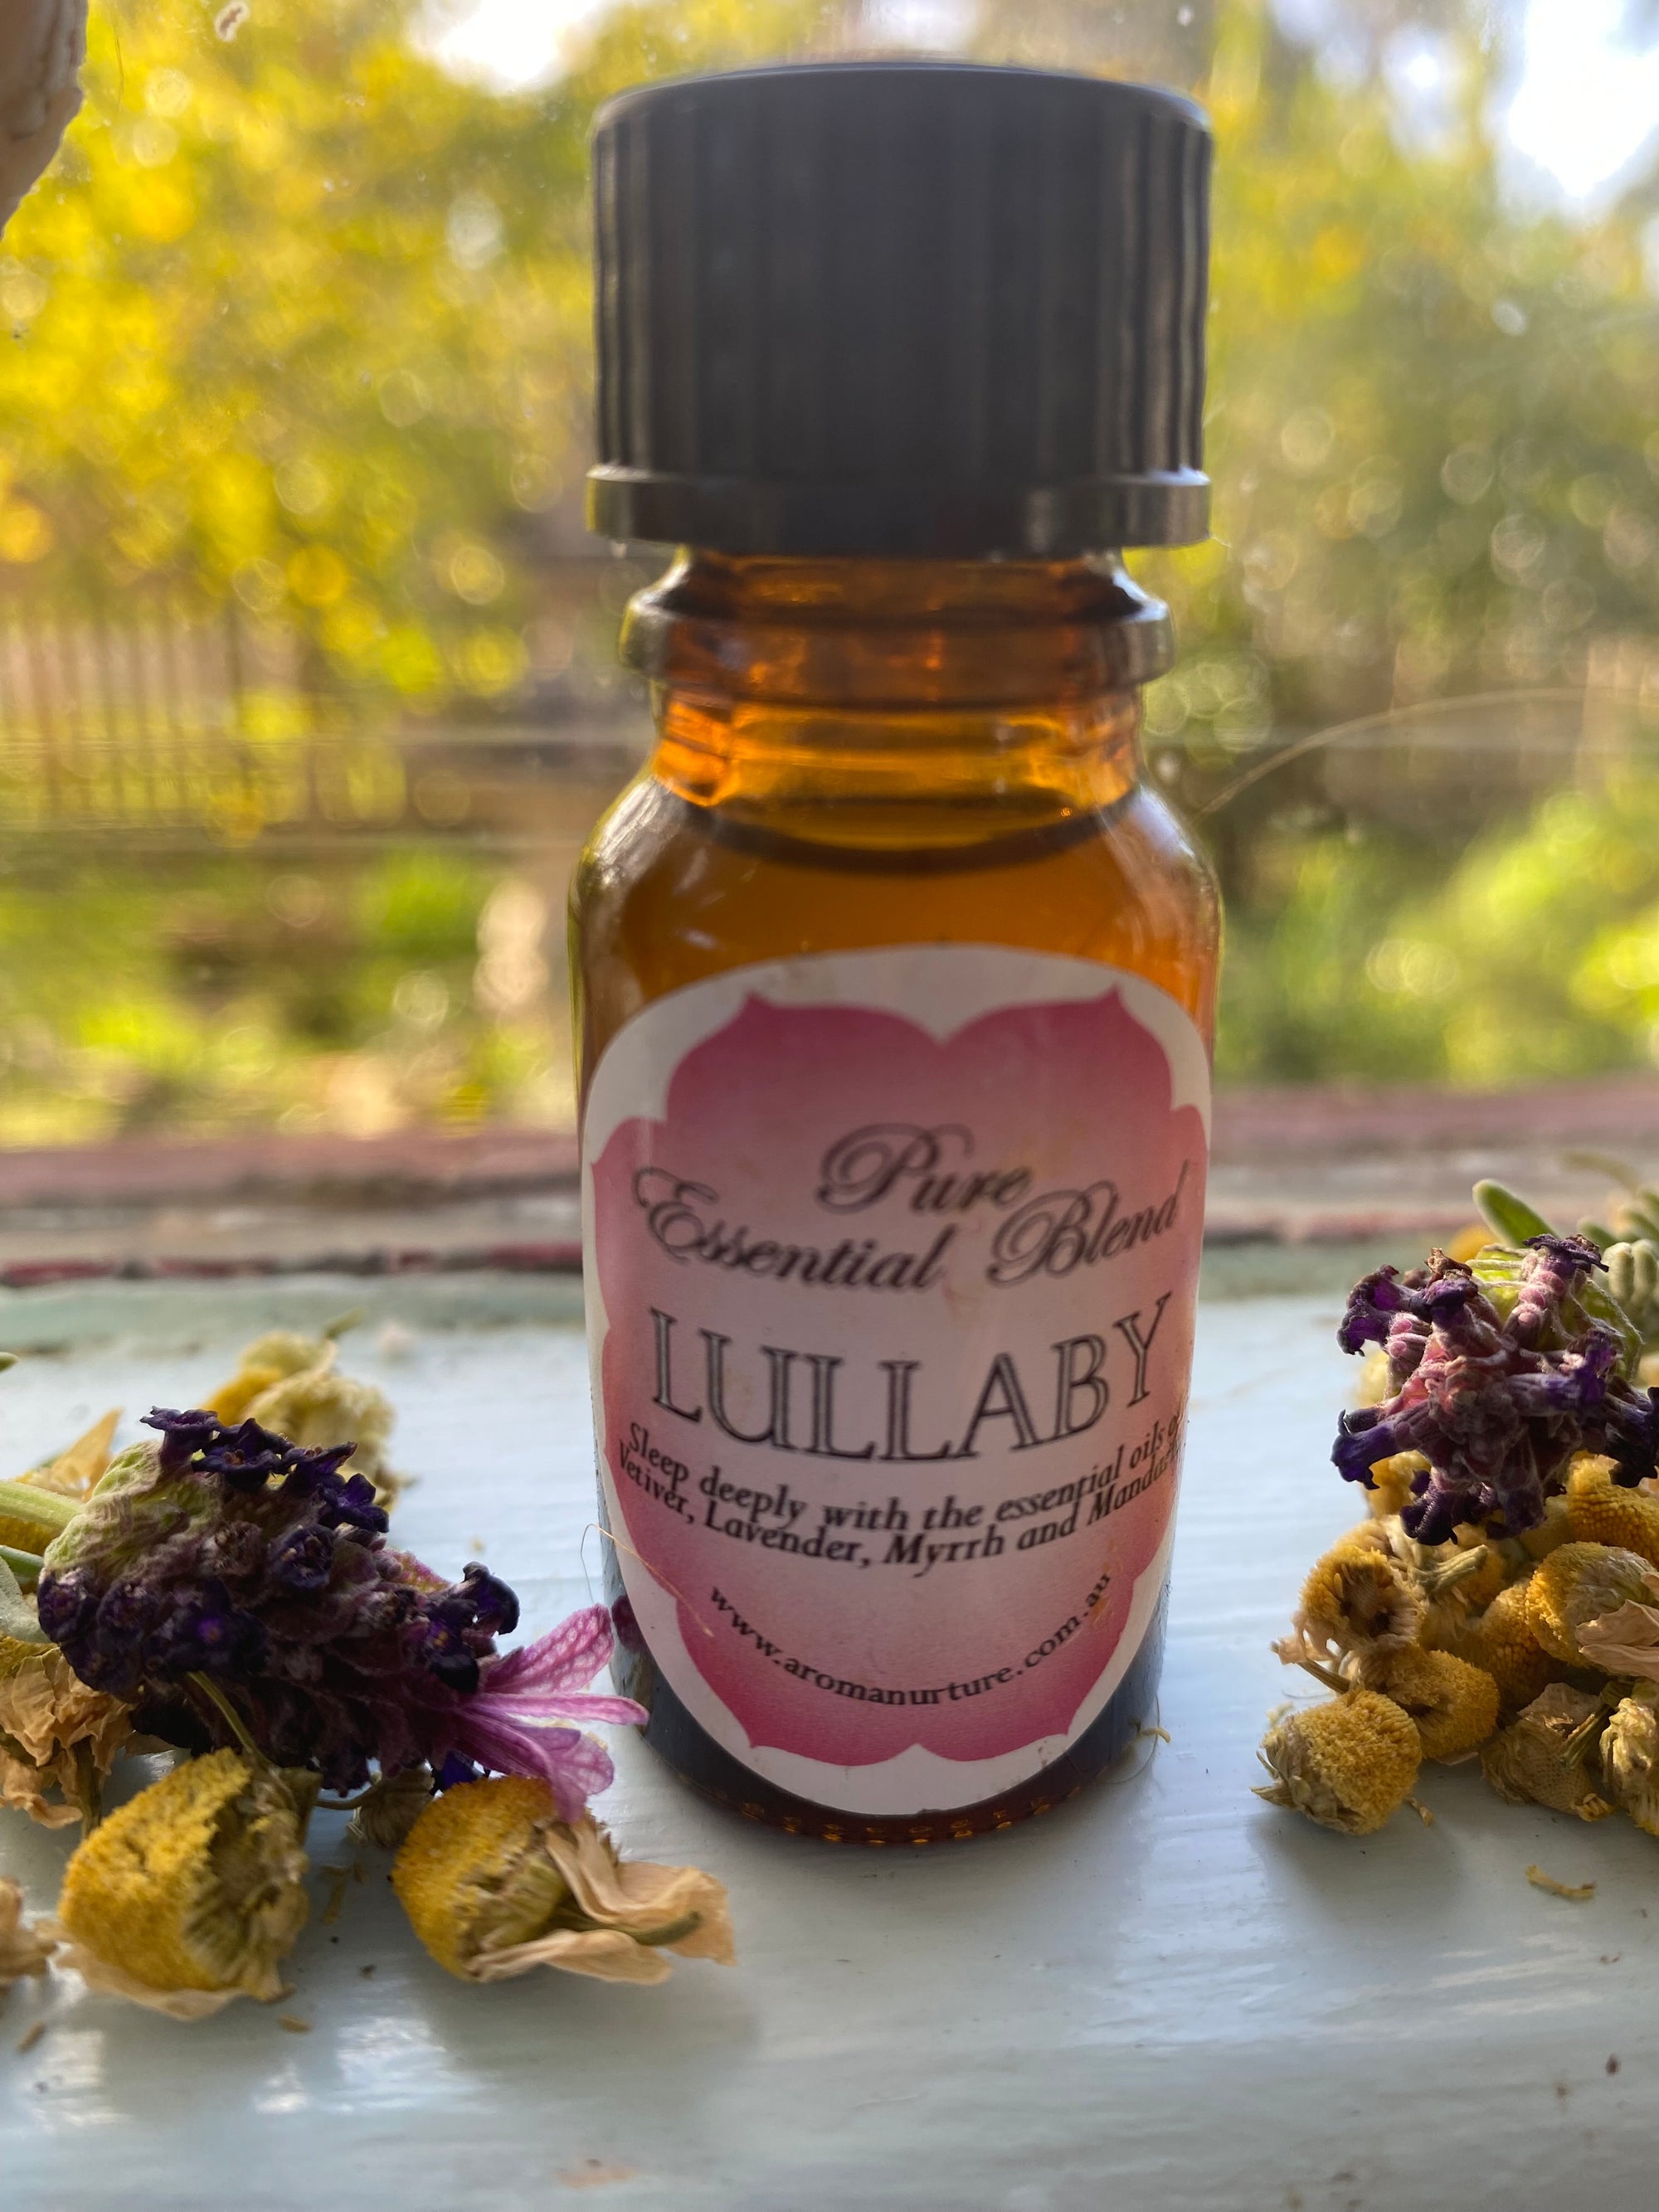 LULLABY Pure essential oil blend